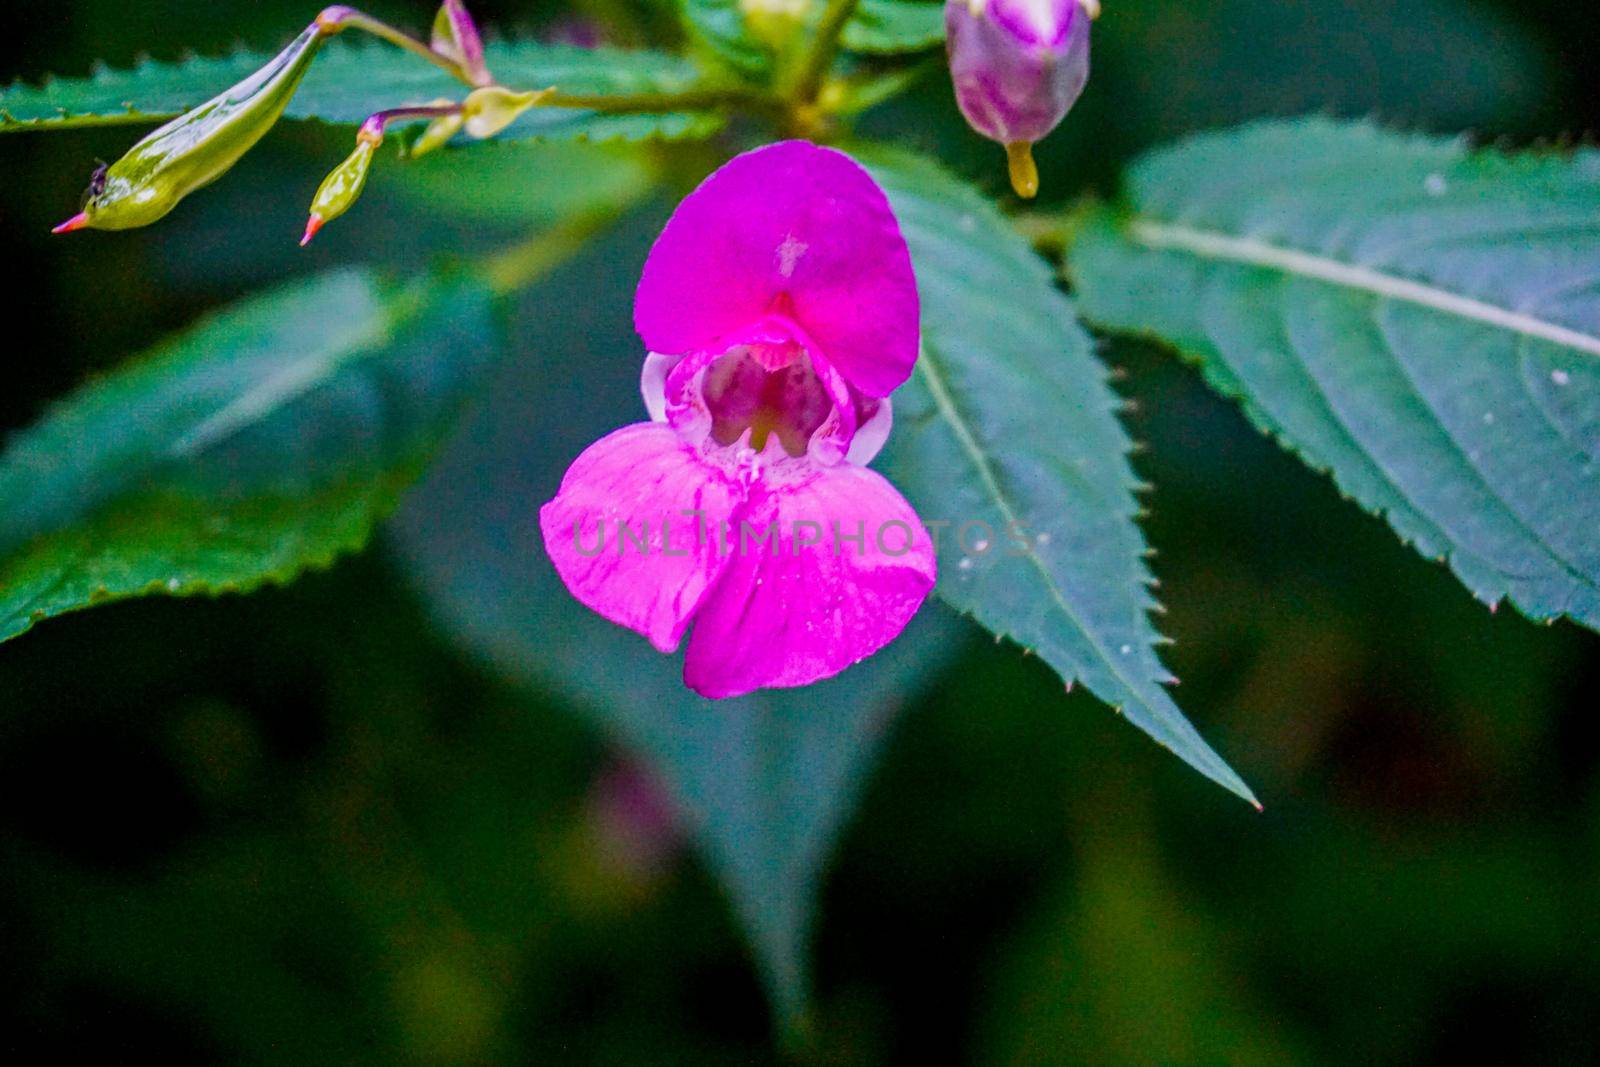 Blossom of a pink Impatiens glandulifera flower by pisces2386